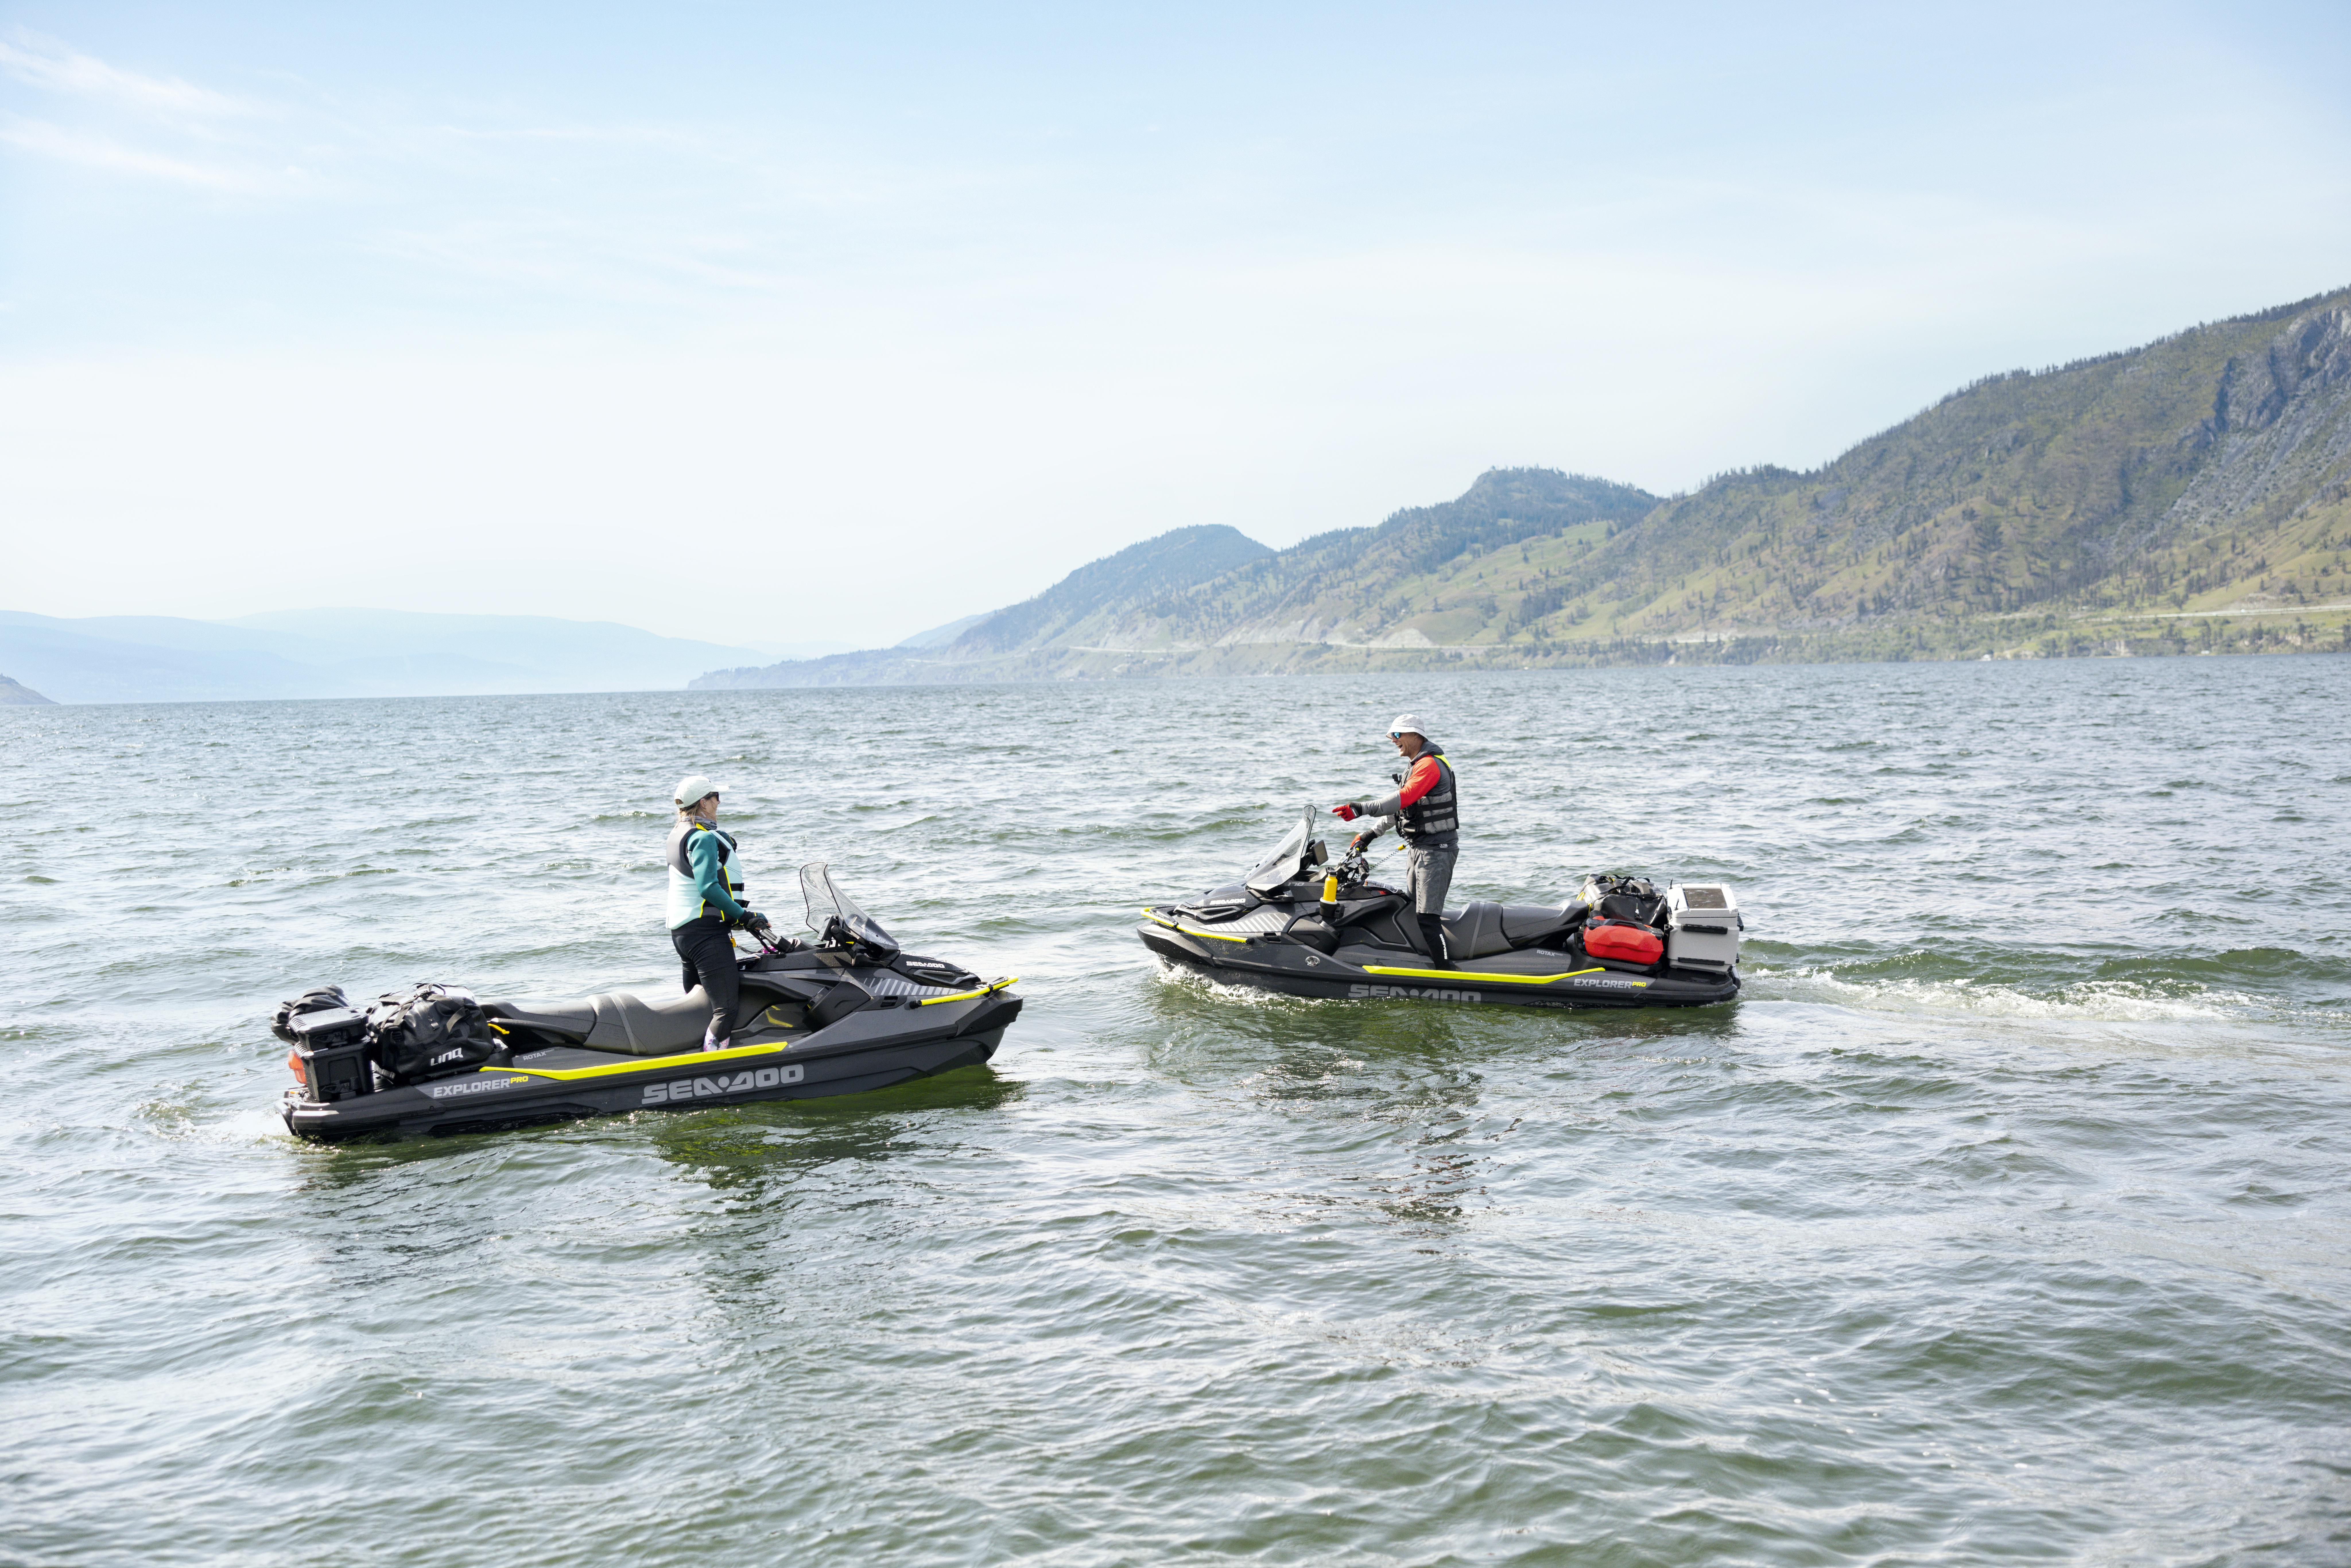 INTRODUCING THE MY23 SEA-DOO LINE-UP